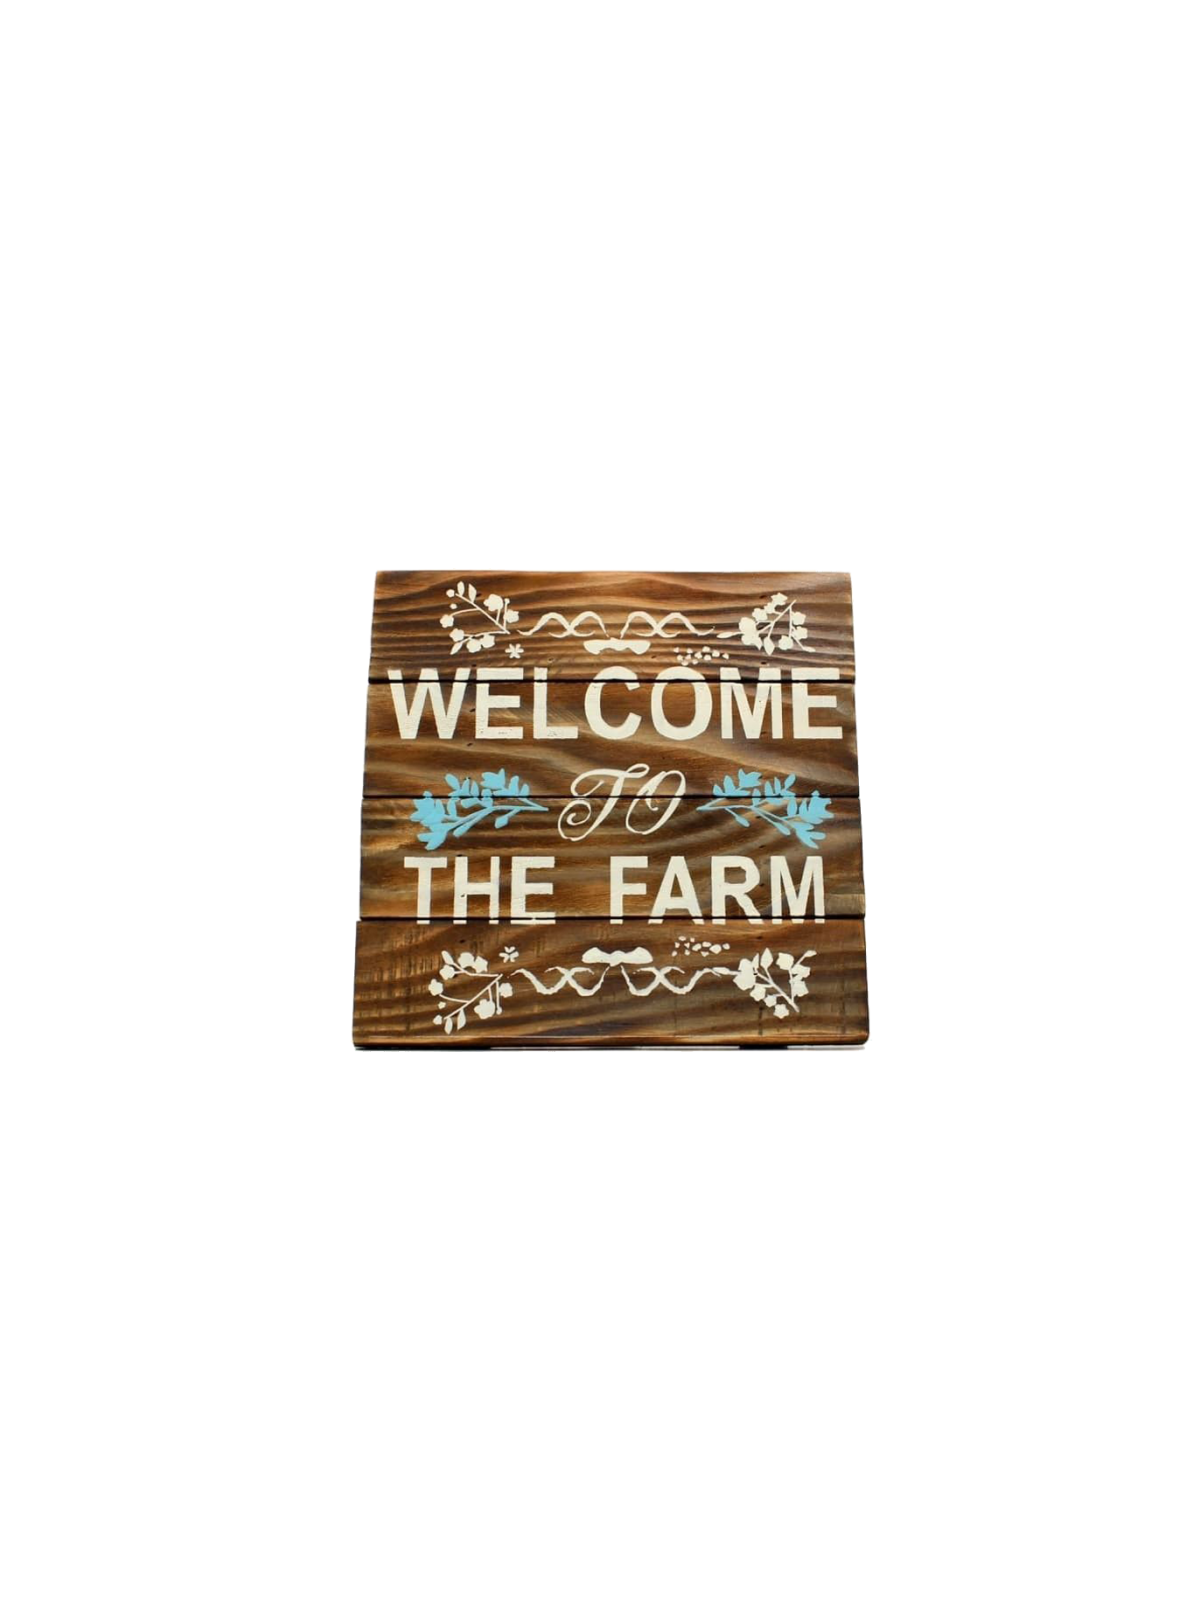 Welcome to the Farm Sign